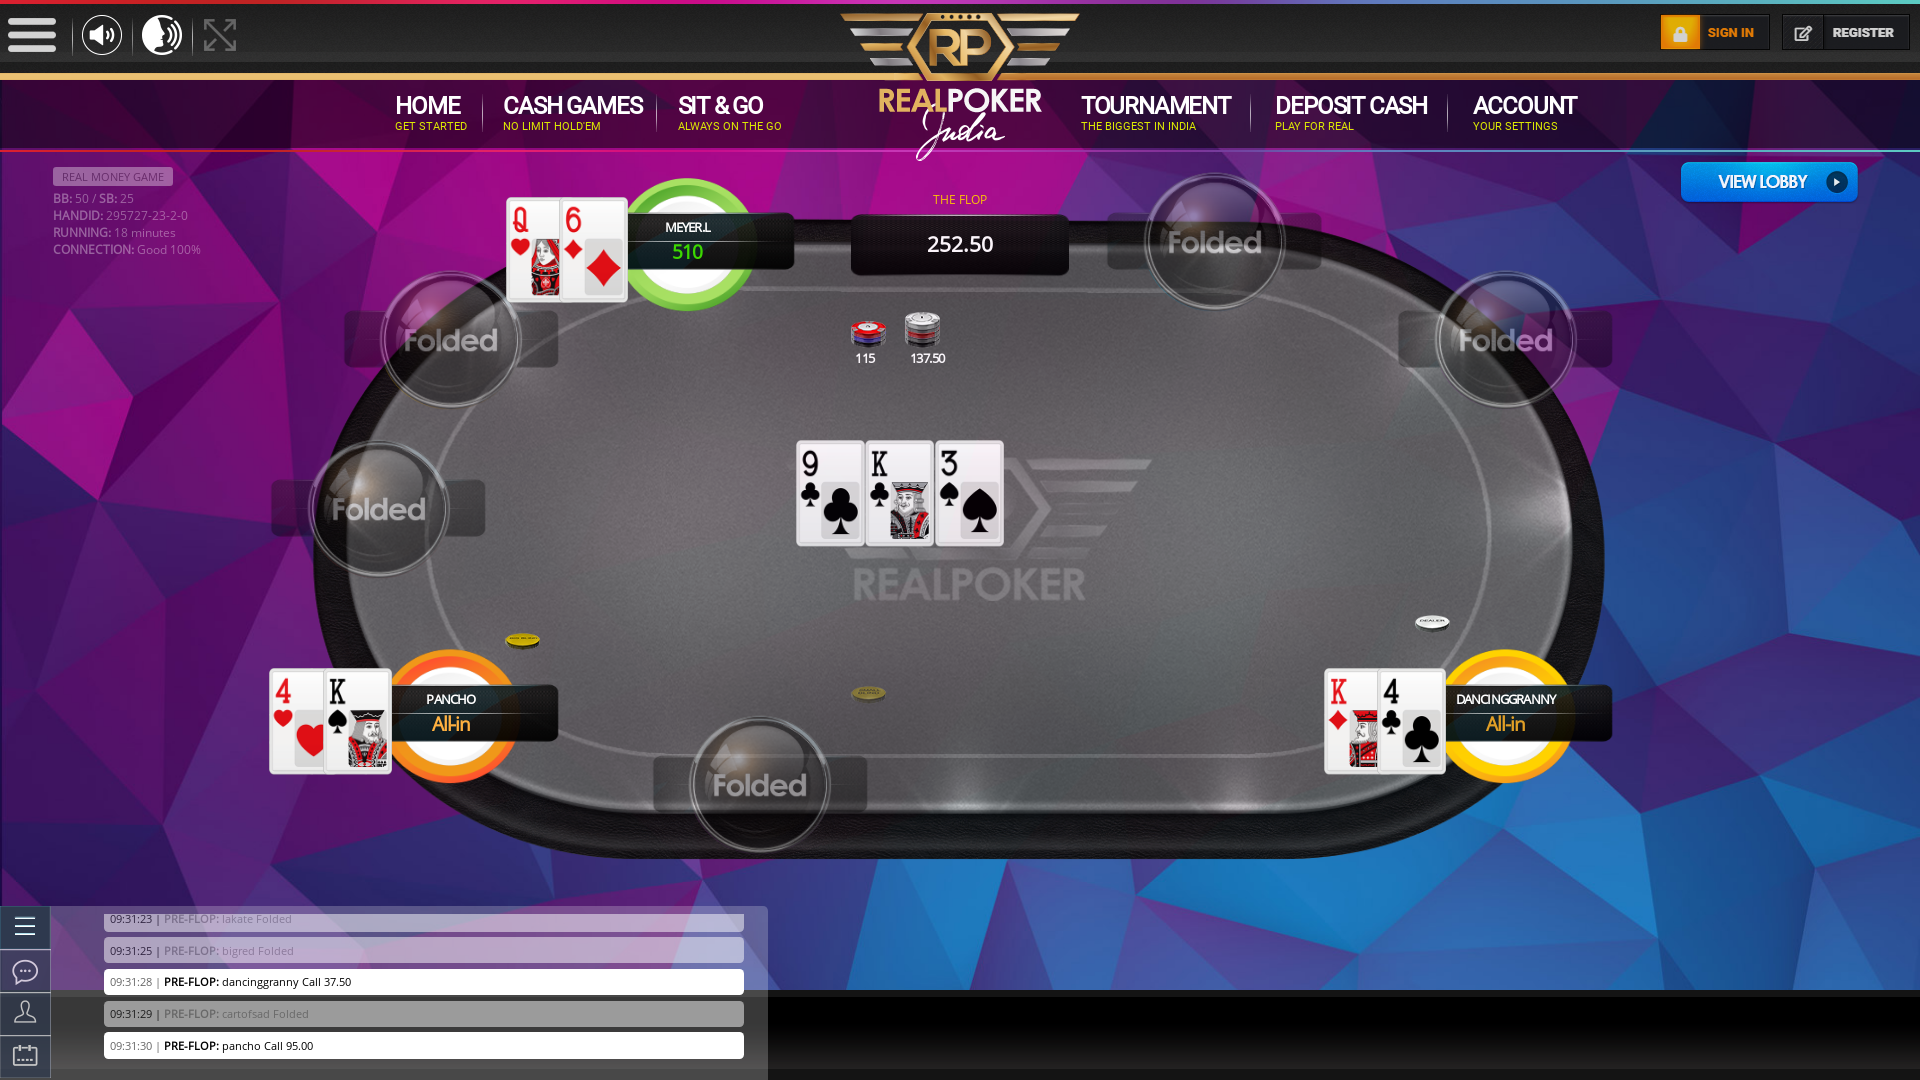 Real poker 10 player table in the 18th minute